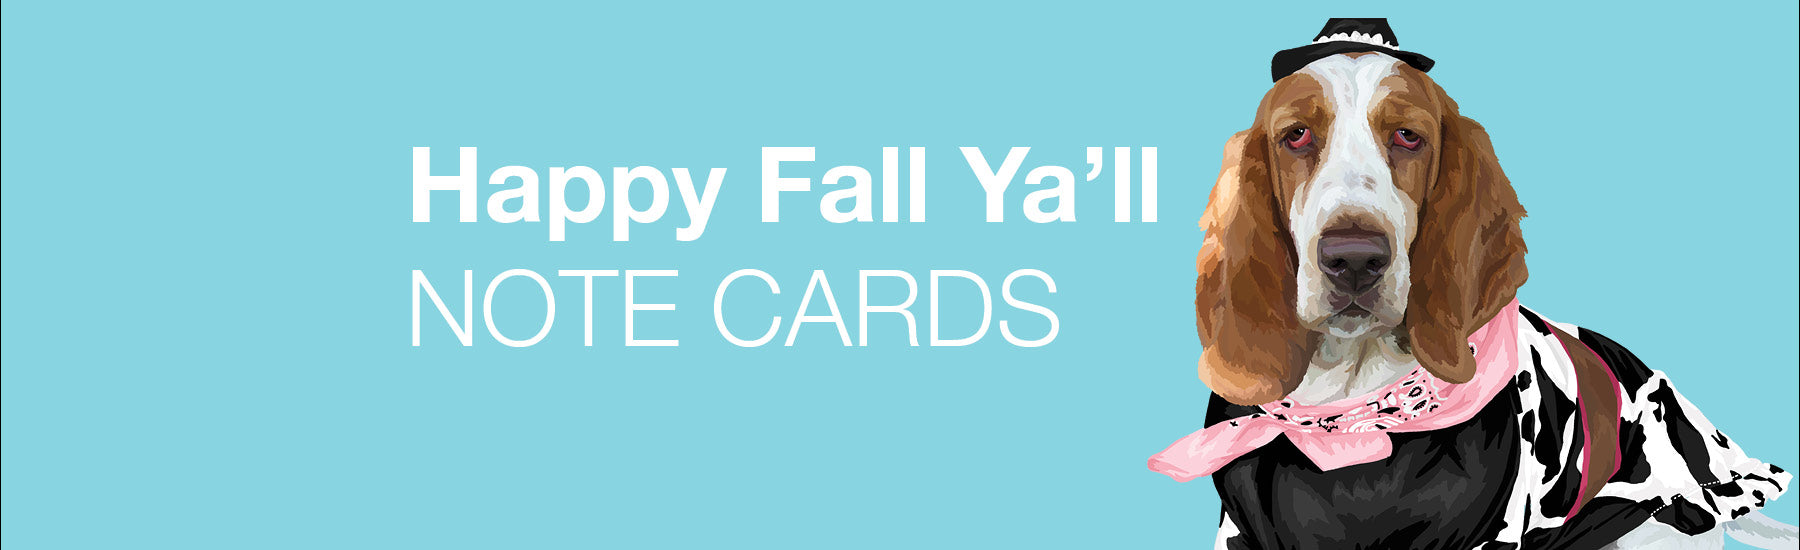 FALL NOTE CARDS